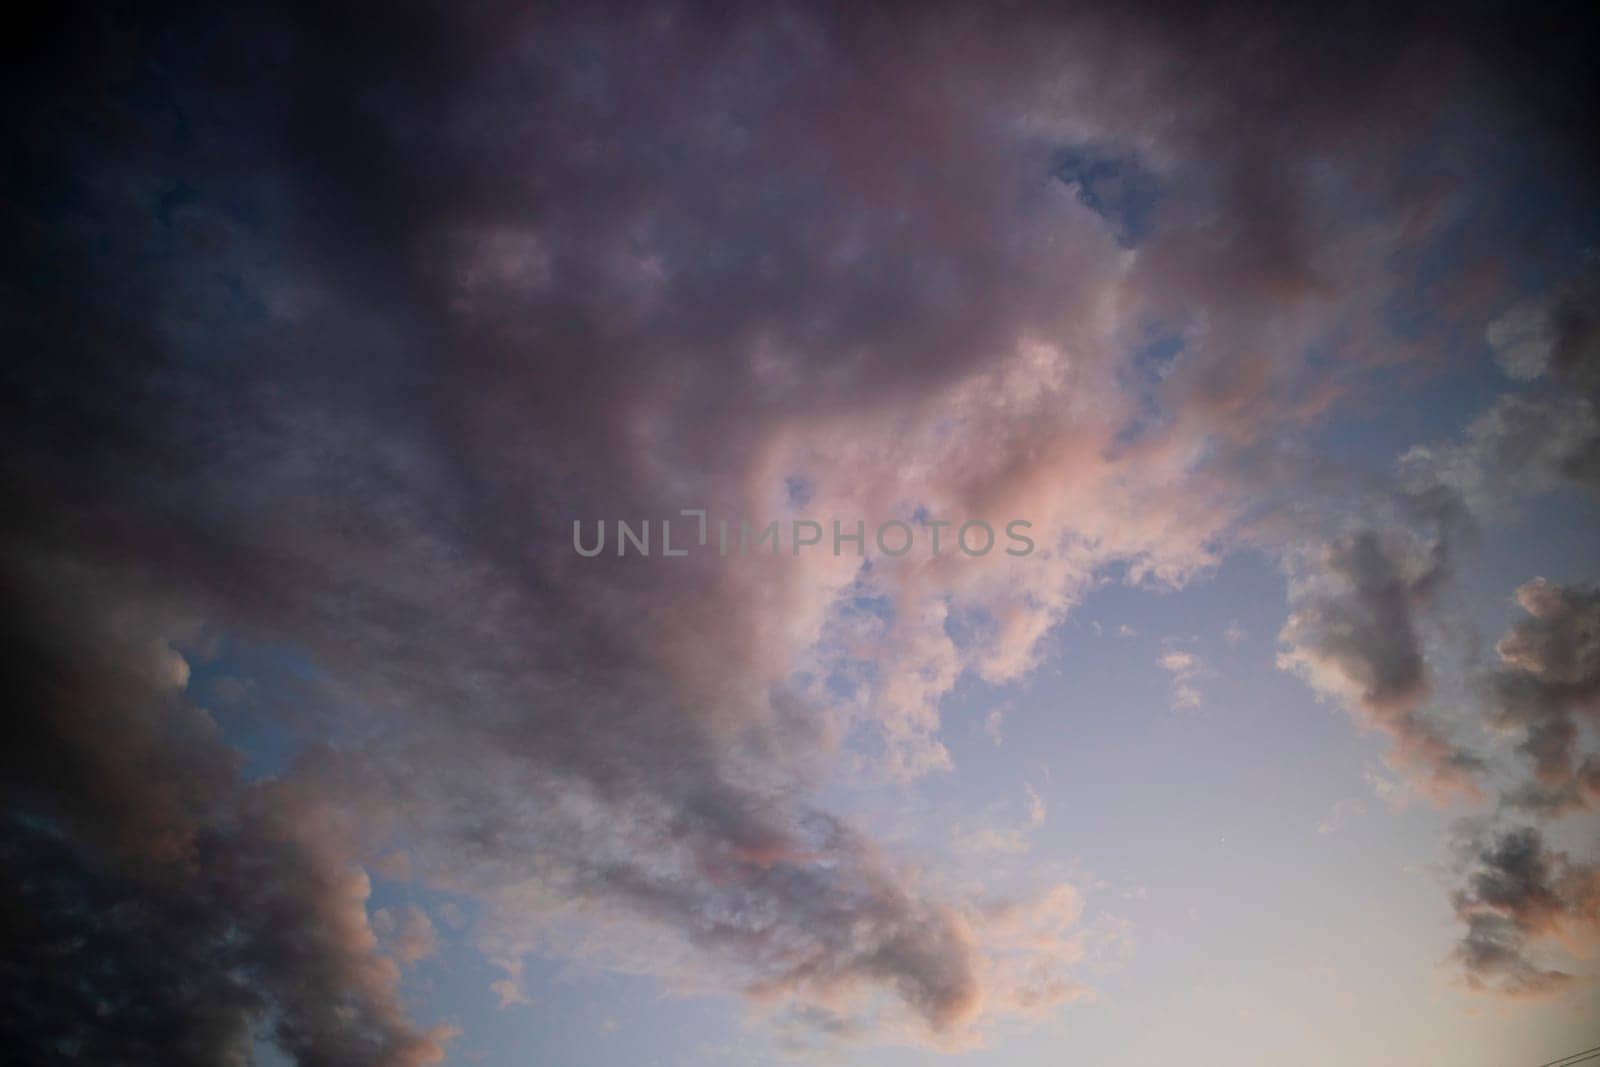 Photographic documentation of a group of colored clouds taken at sunset 